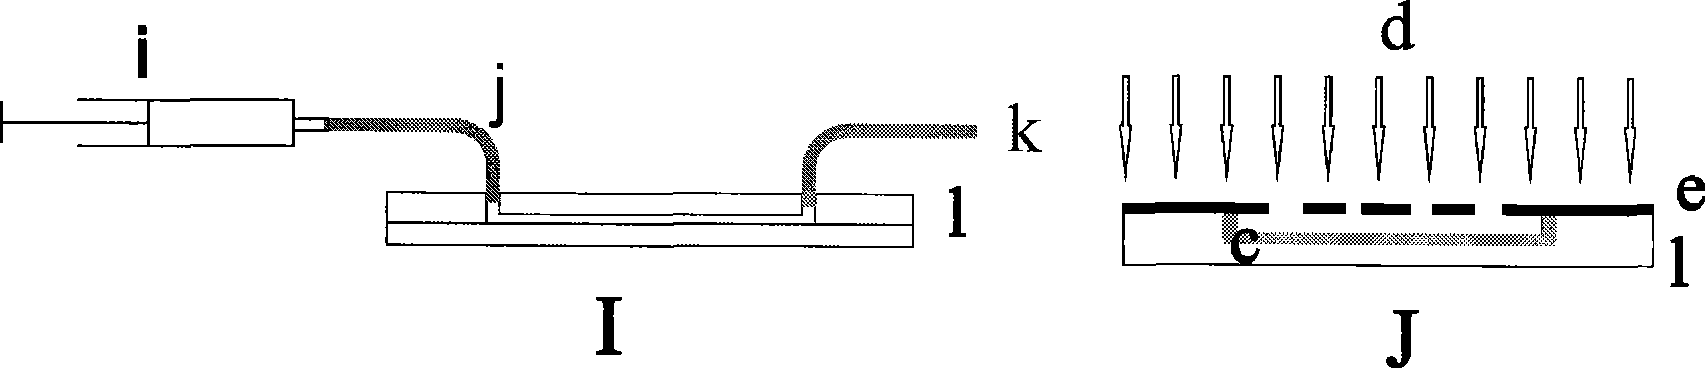 Method for producing film metal fine device on PDMS surface